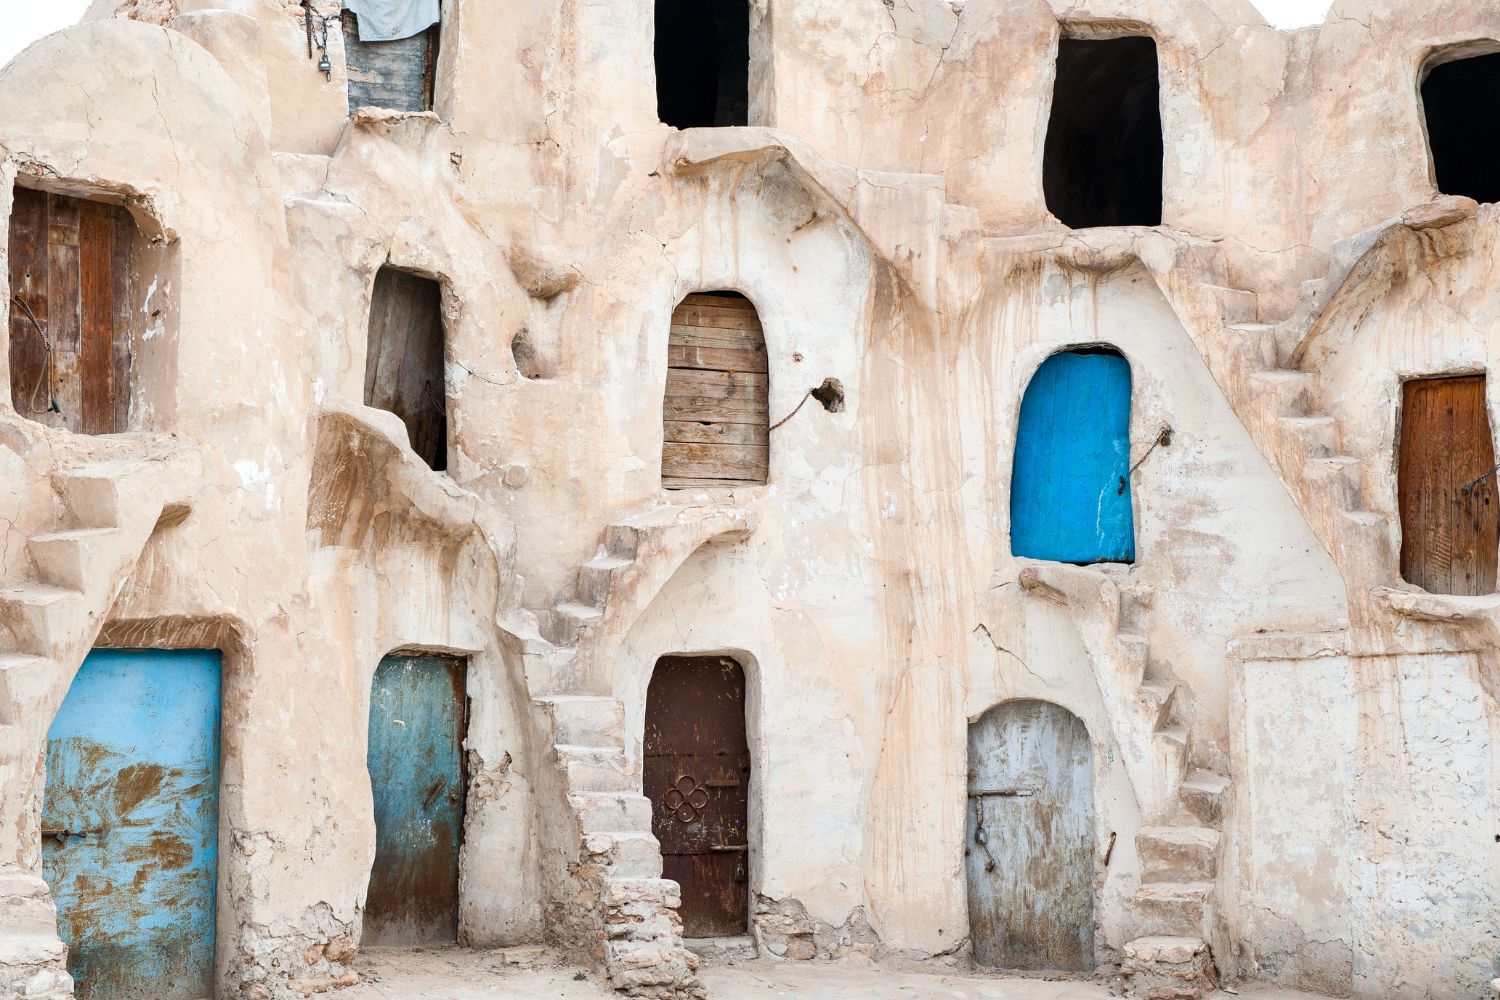 Is Djerba worth visiting? Ancient troglodyte dwellings with textured clay walls and varying door shapes, some painted in bright blue, in the traditional architectural style of Djerba.